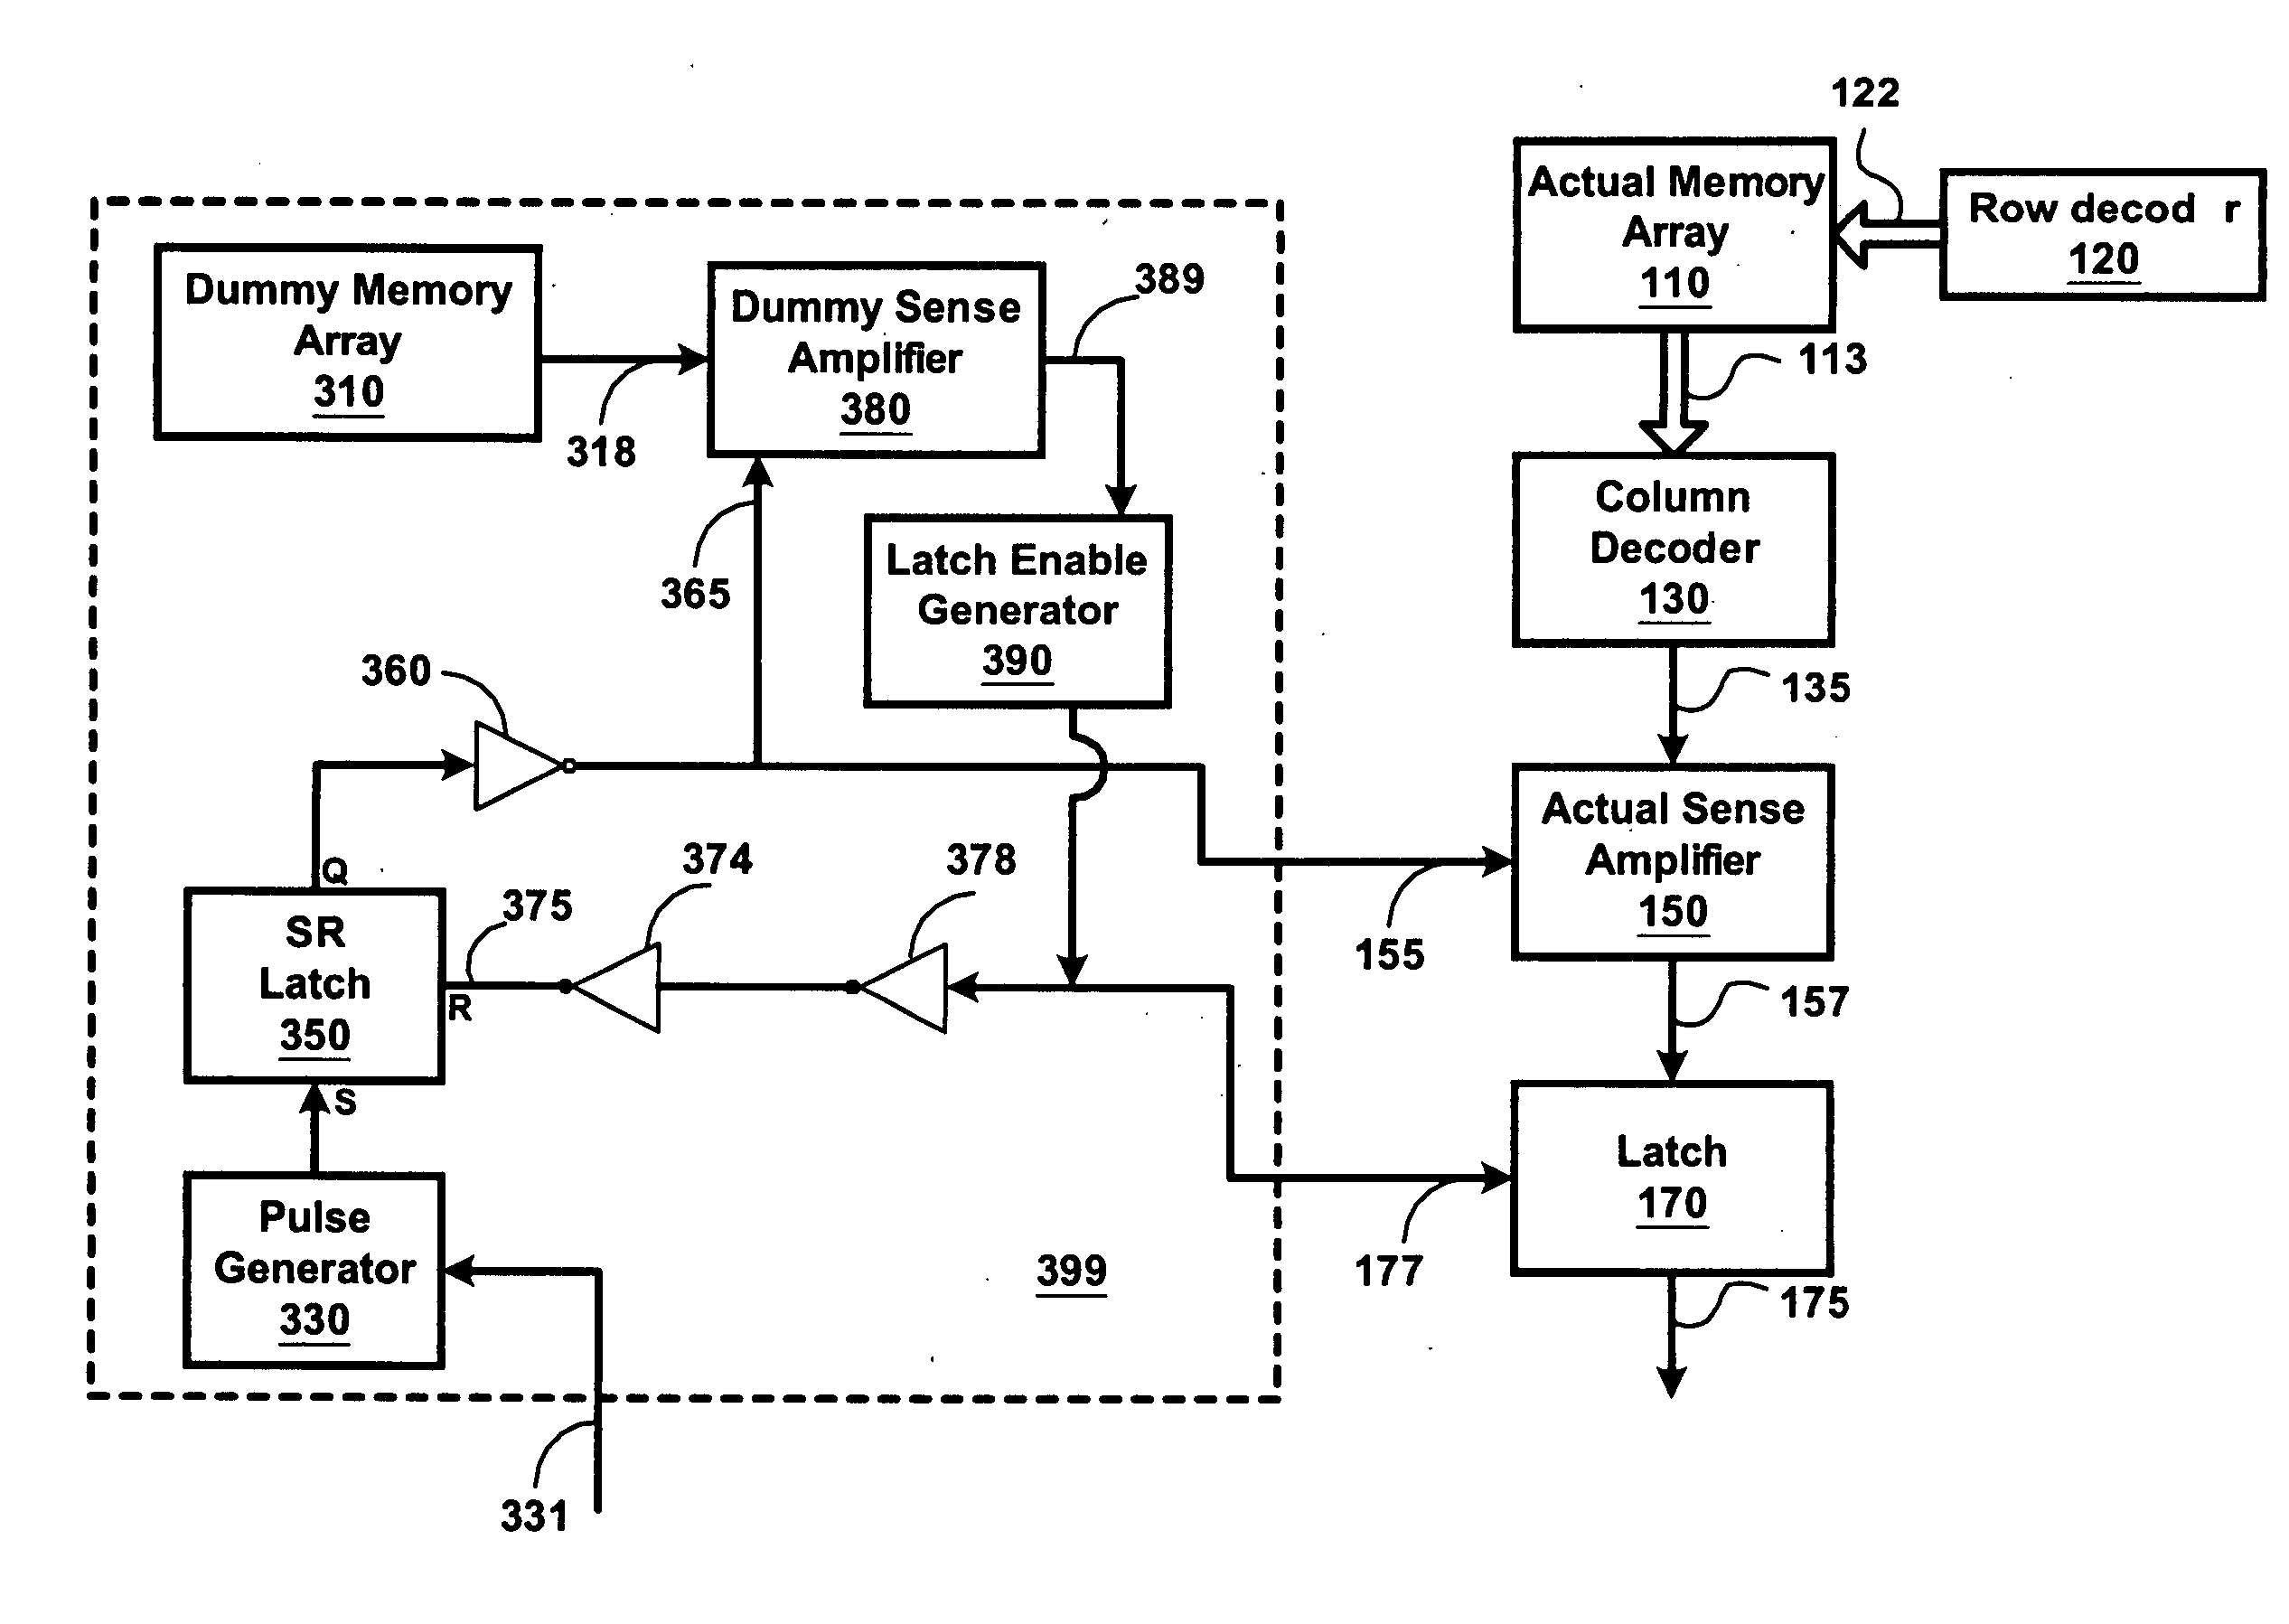 Tracking circuit enabling quick/accurate retrieval of data stored in a memory array